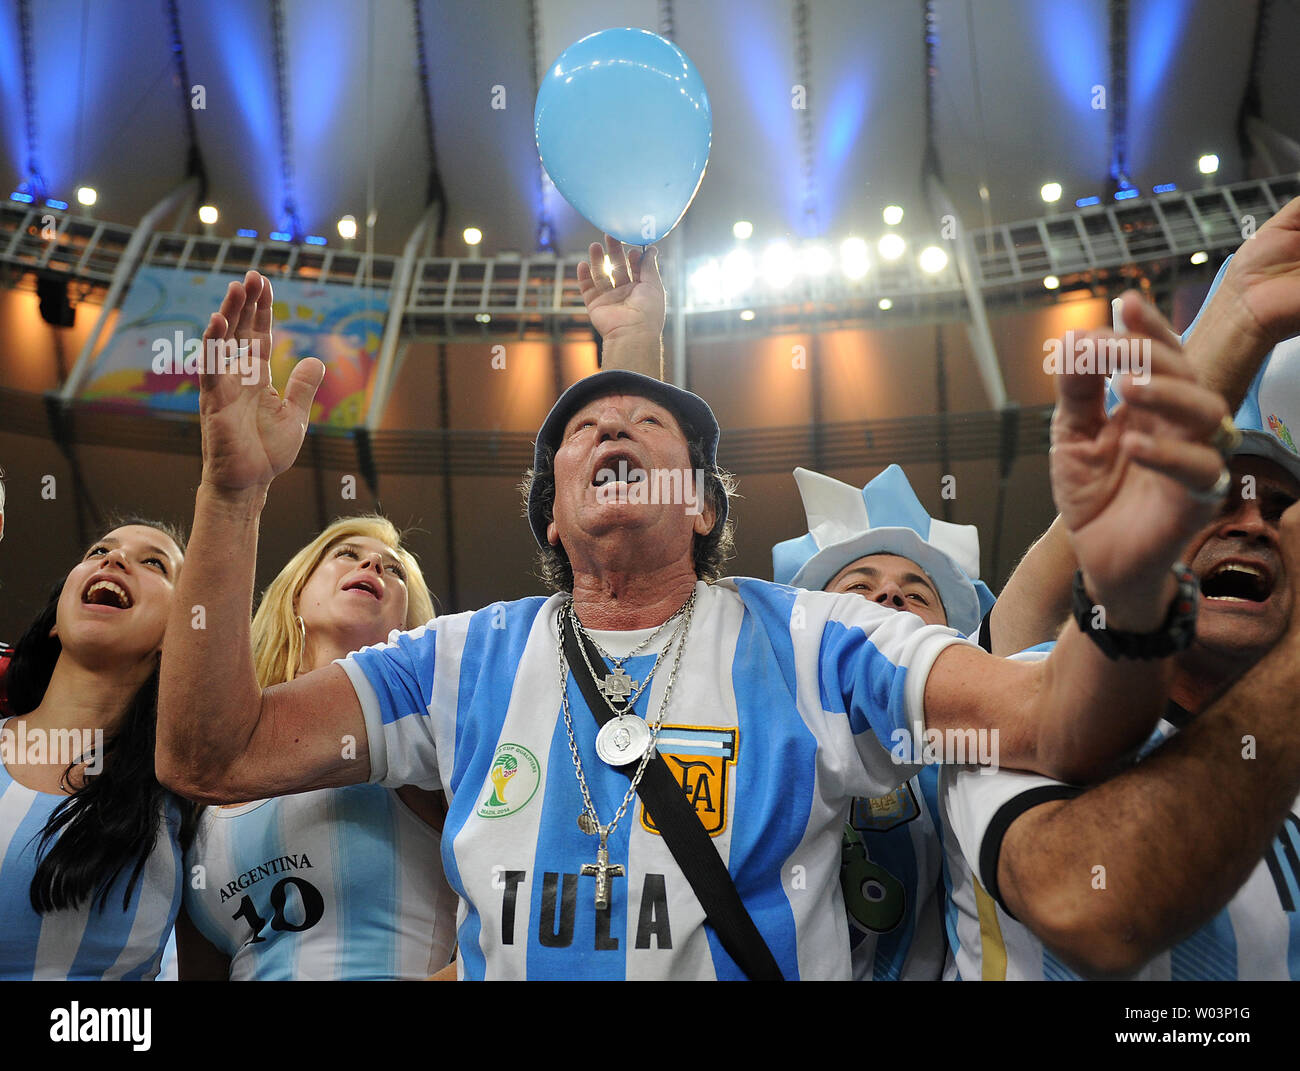 An Argentina fan supports his team during the 2014 FIFA World Cup Group F match at the Estadio do Maracana in Rio de Janeiro, Brazil on June 15, 2014. UPI/Chris Brunskill Stock Photo